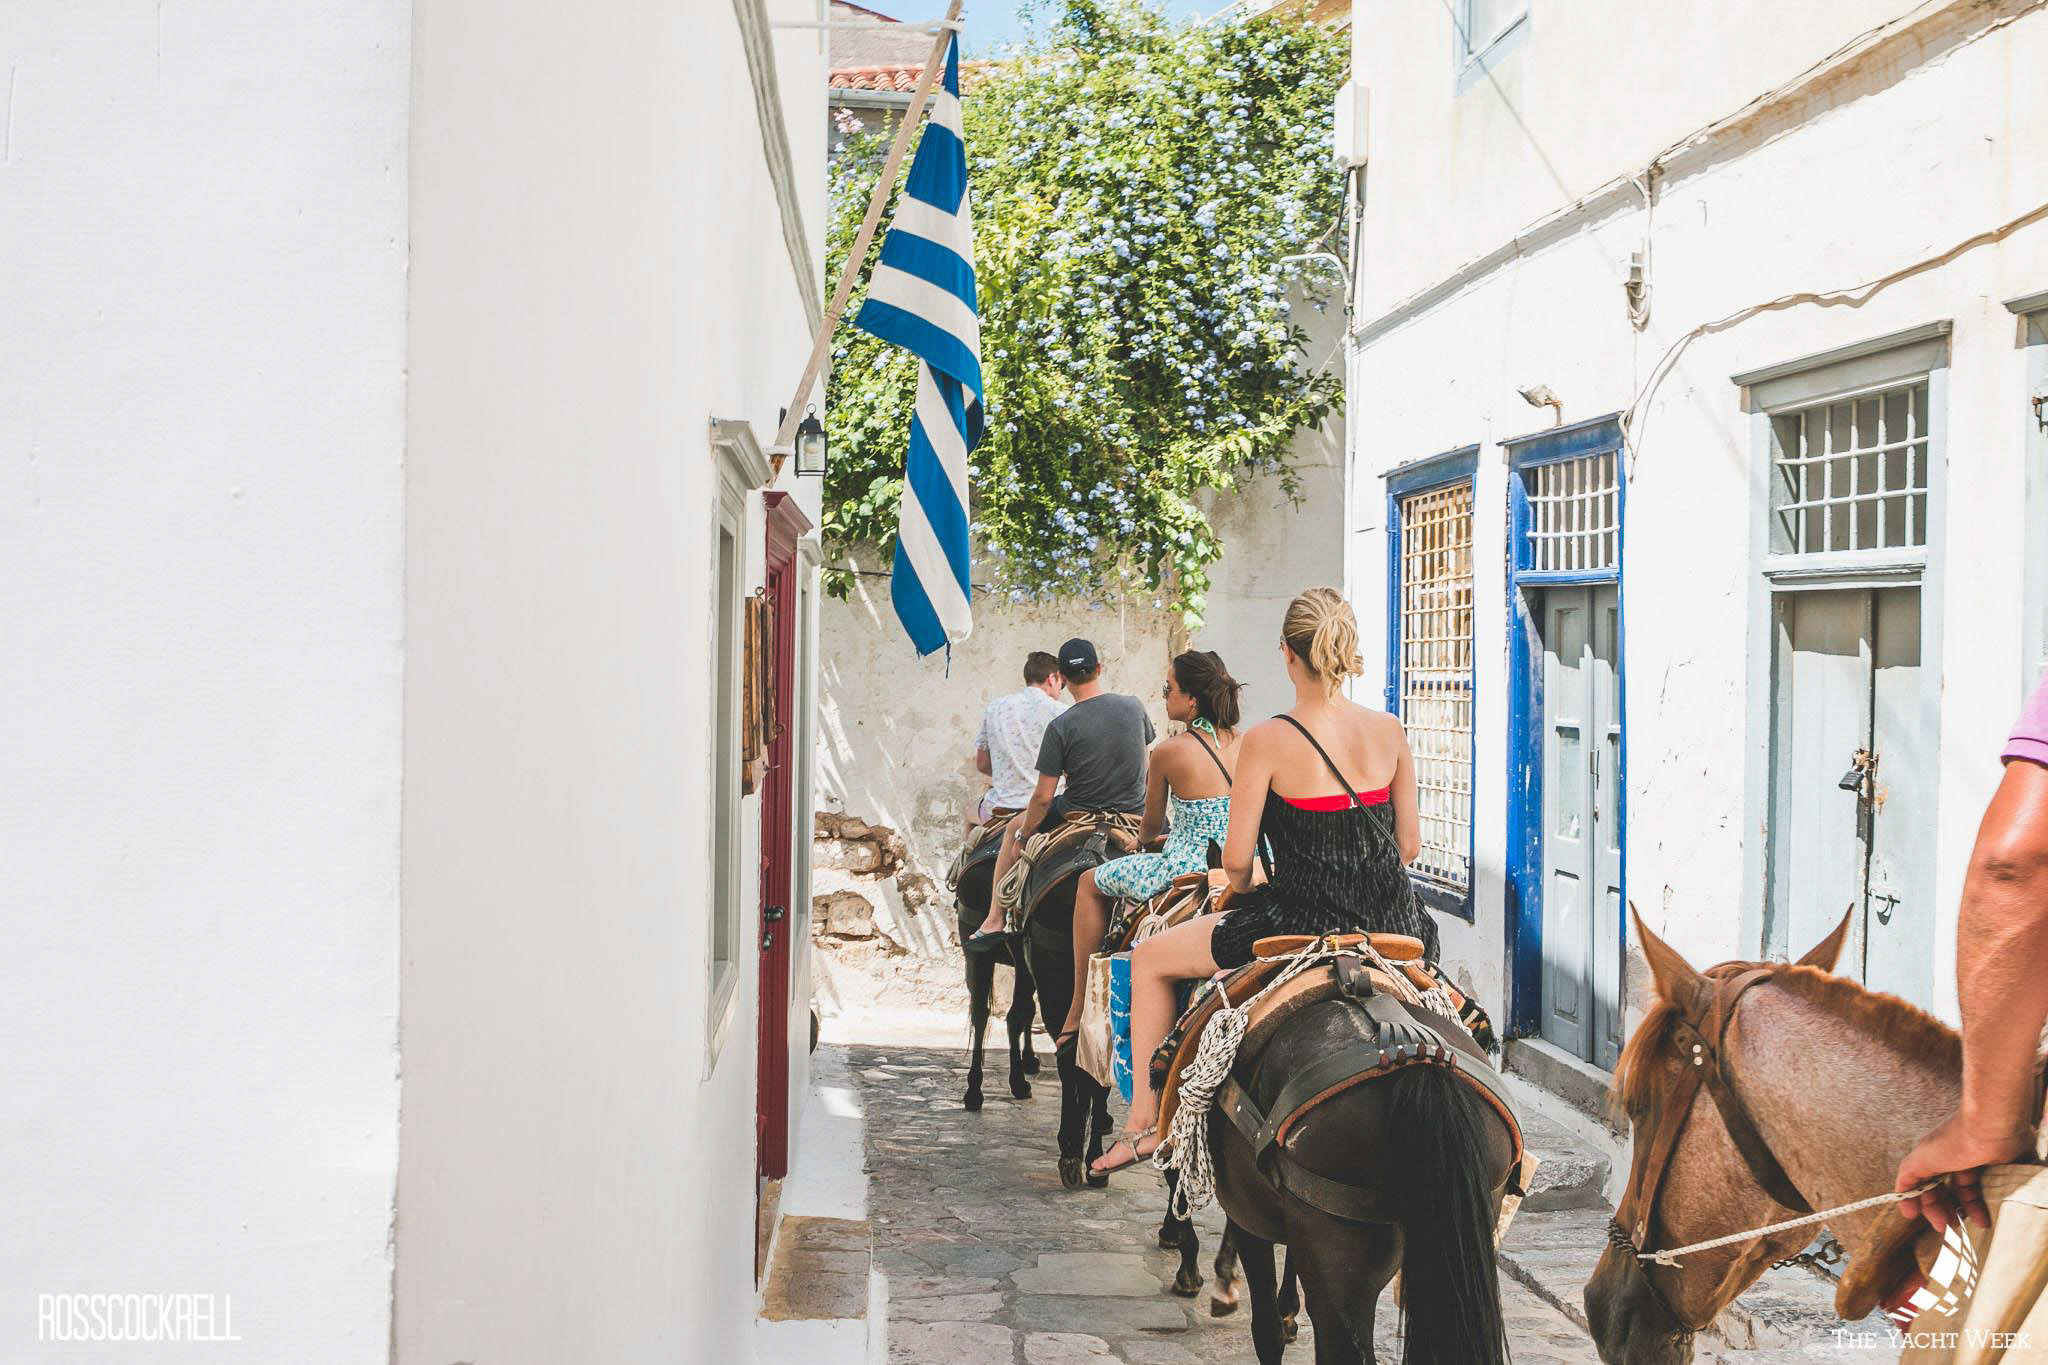 Donkey rides at The Yacht Week in Hydra, Greece!